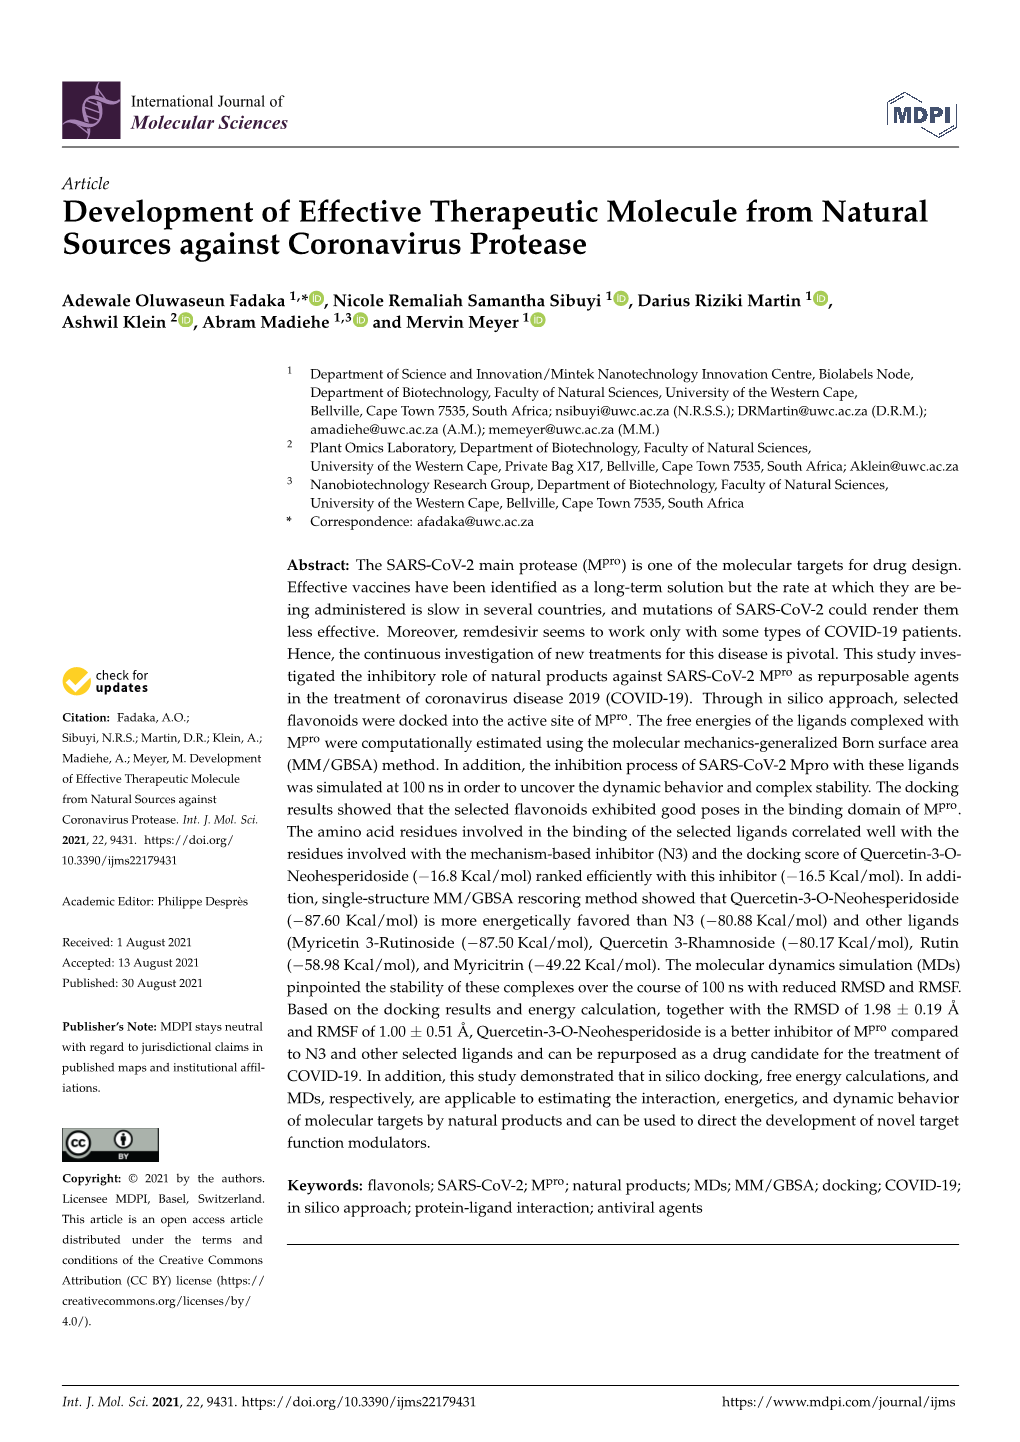 Development of Effective Therapeutic Molecule from Natural Sources Against Coronavirus Protease